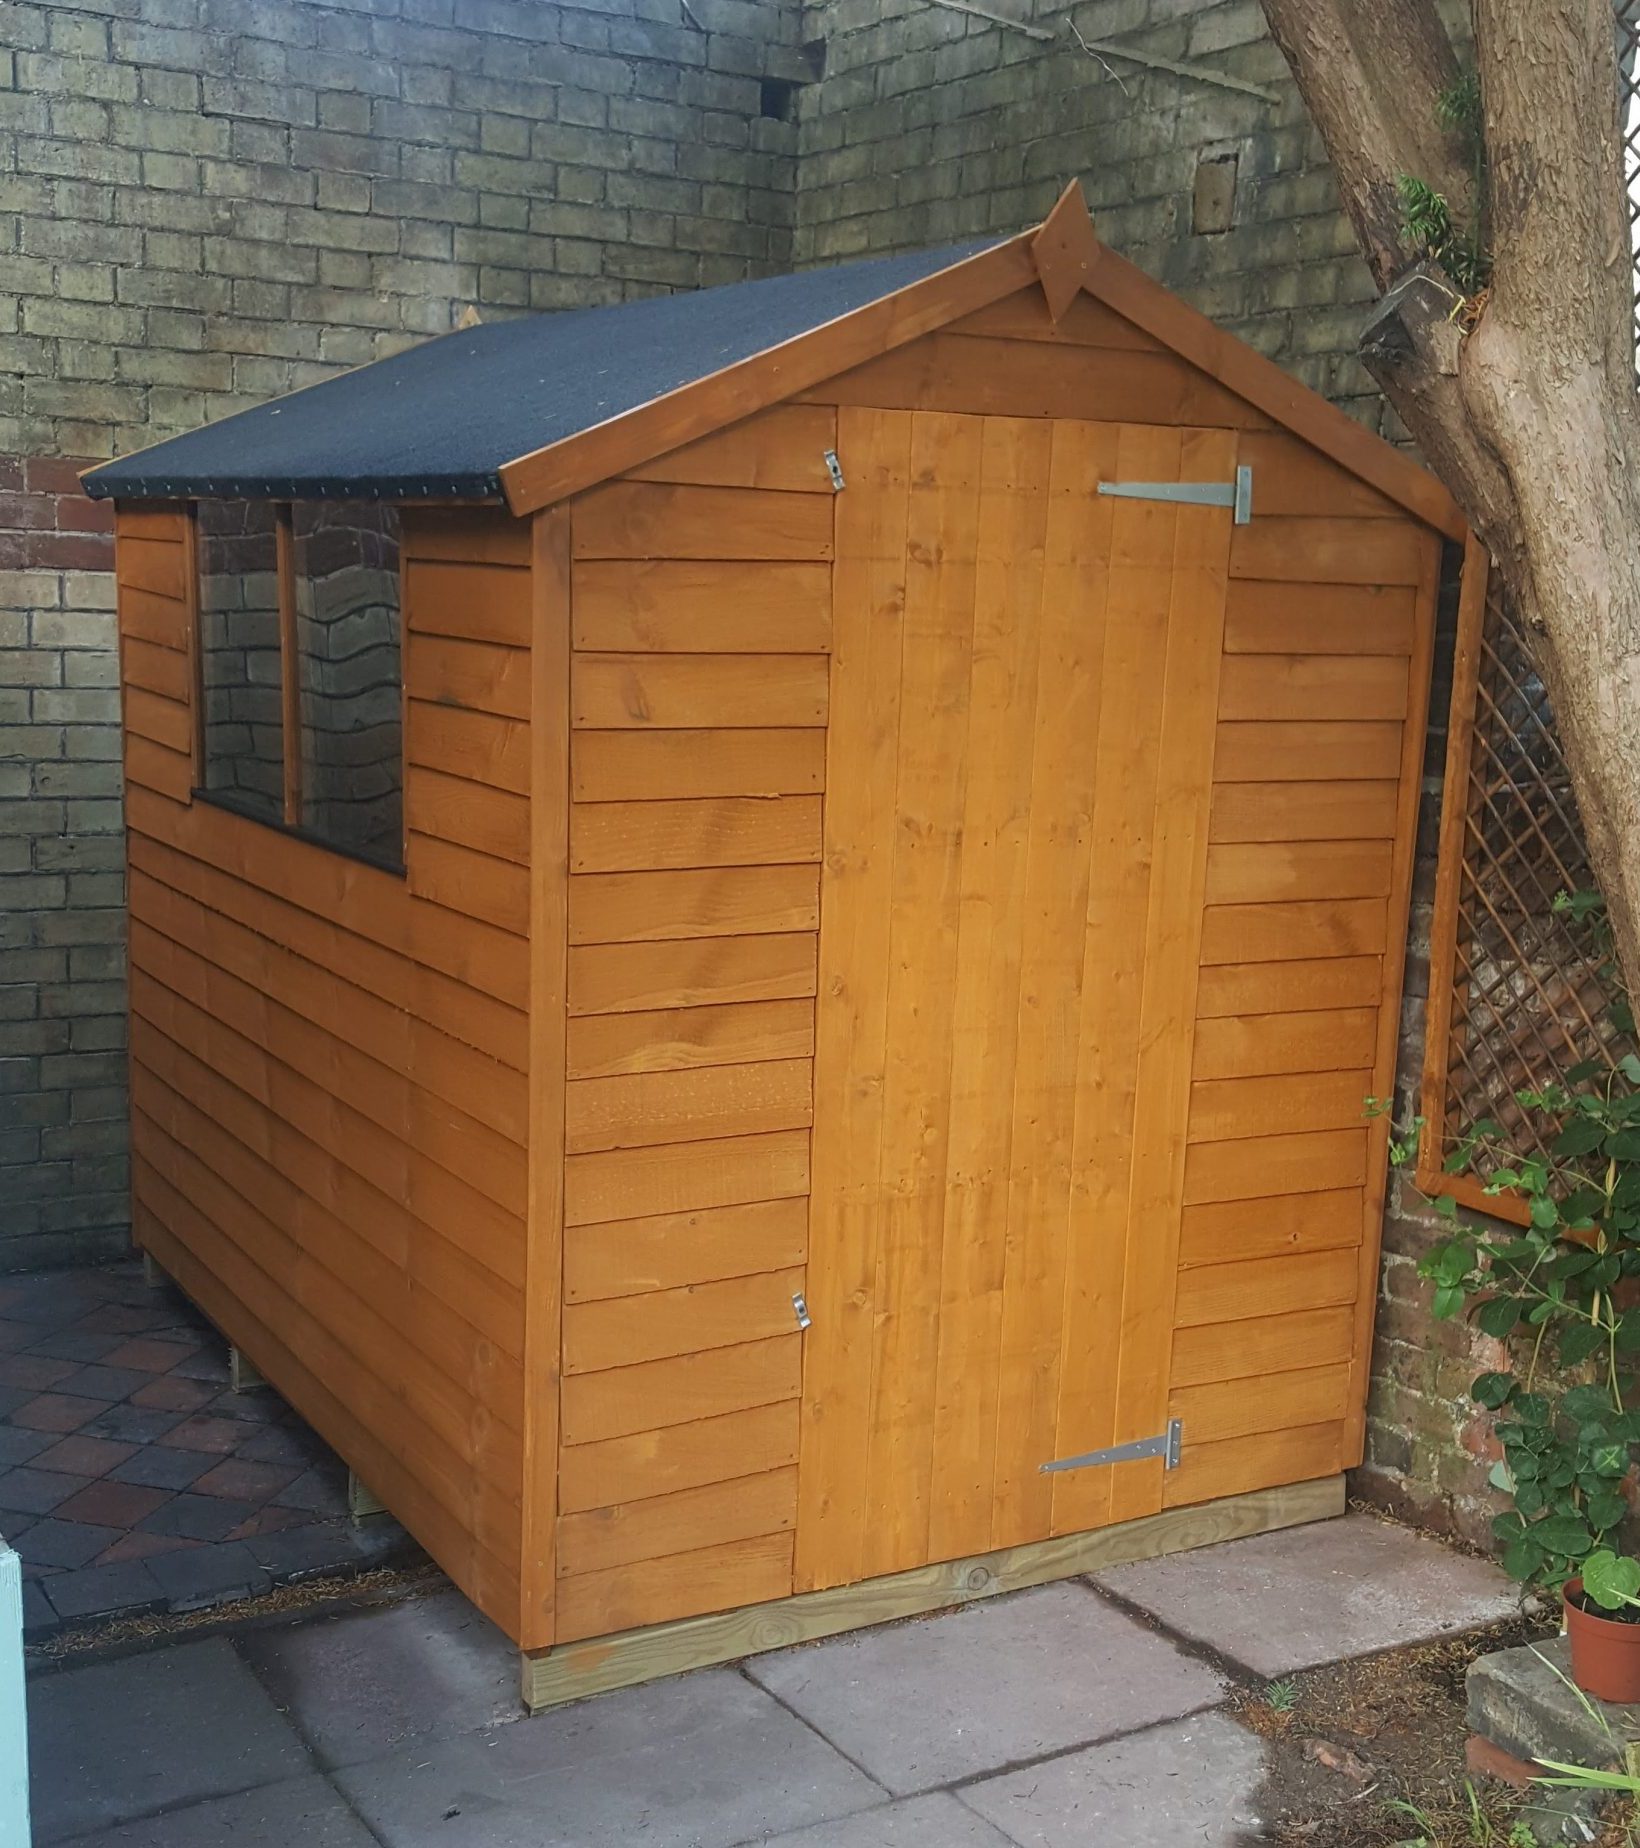 New shed finished